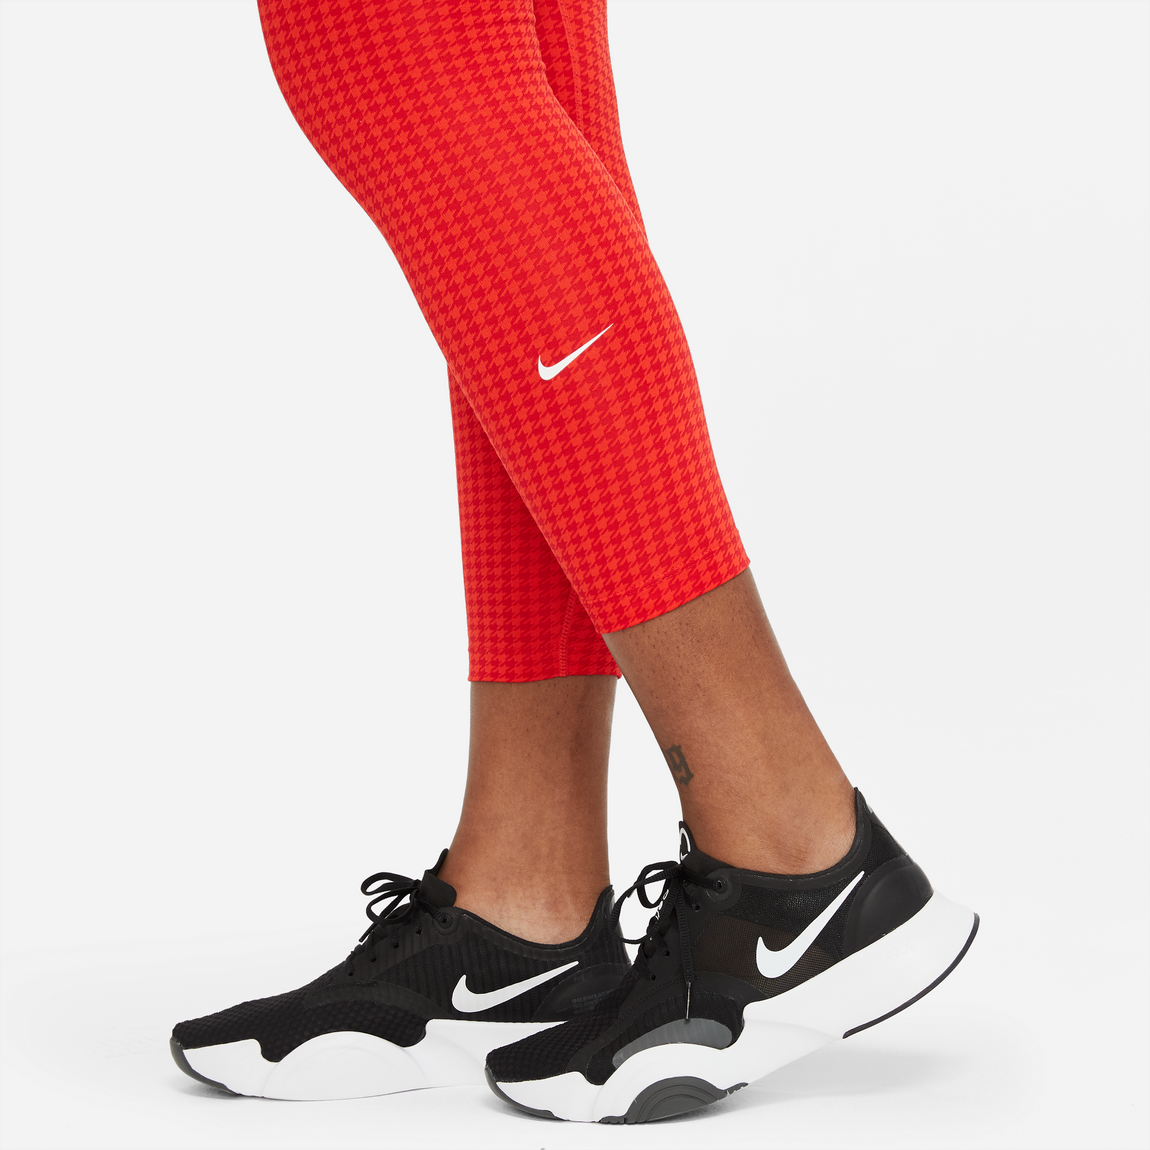 Nike Women's Dri-FIT Run Division Fast Leggings in Berry Red - Size Small